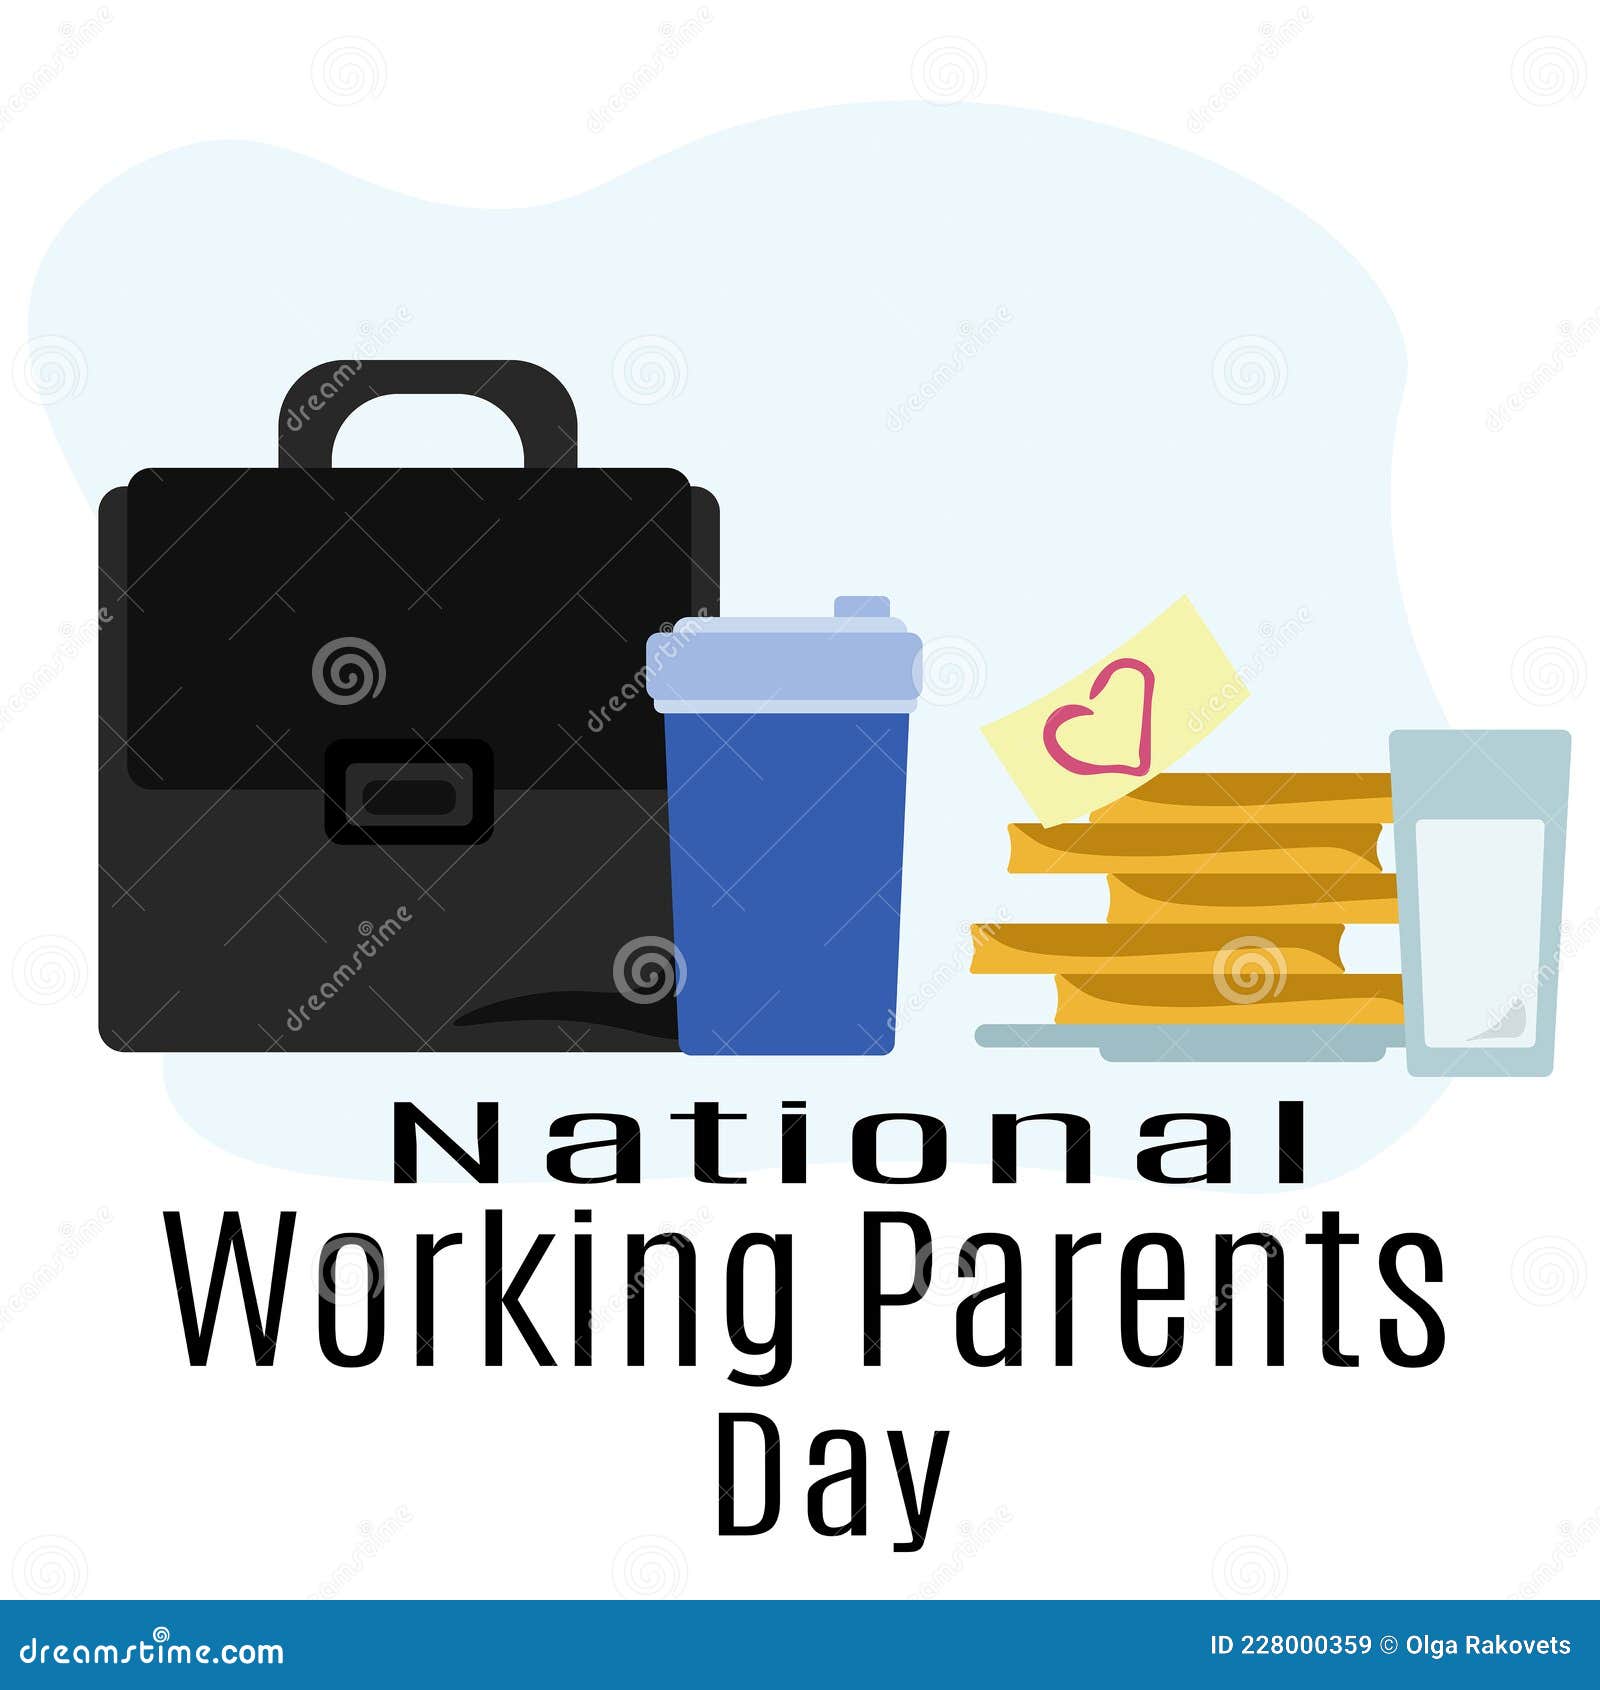 National Working Parents Day, Idea for Poster or Postcard Stock Vector